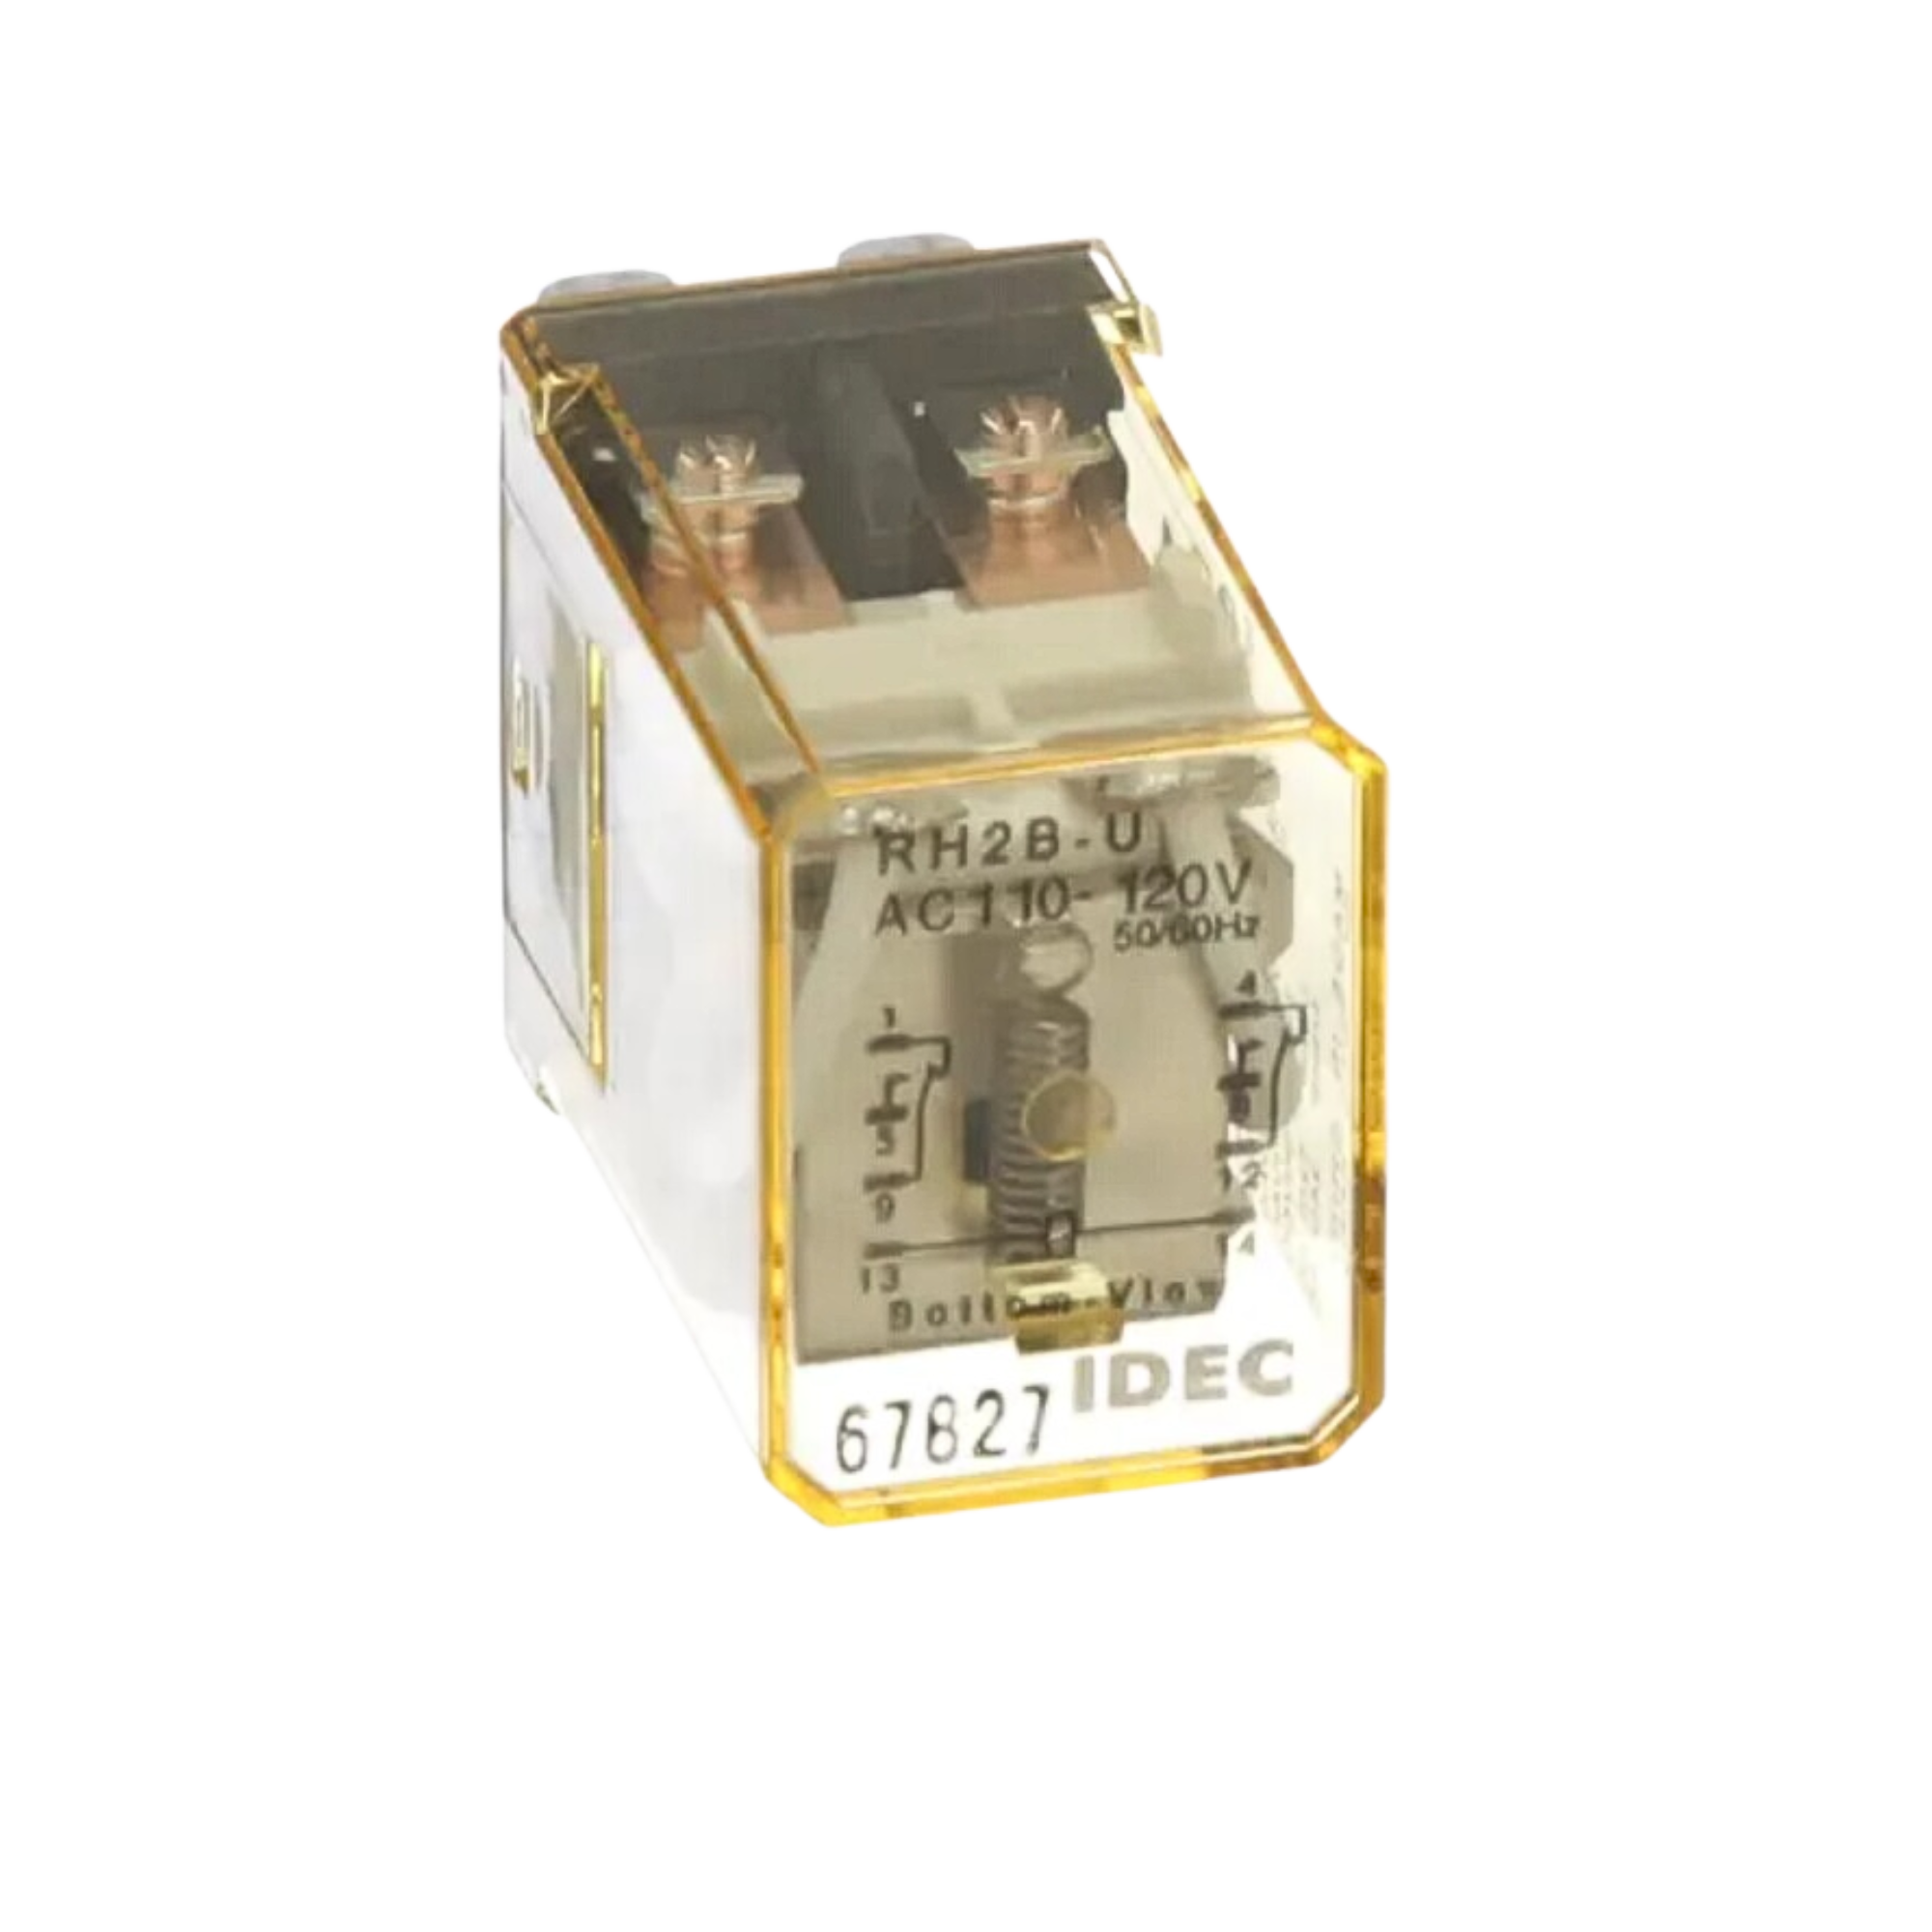 Plug-In Relay | RH2B-UAC110-120V used on Idec product line - front view